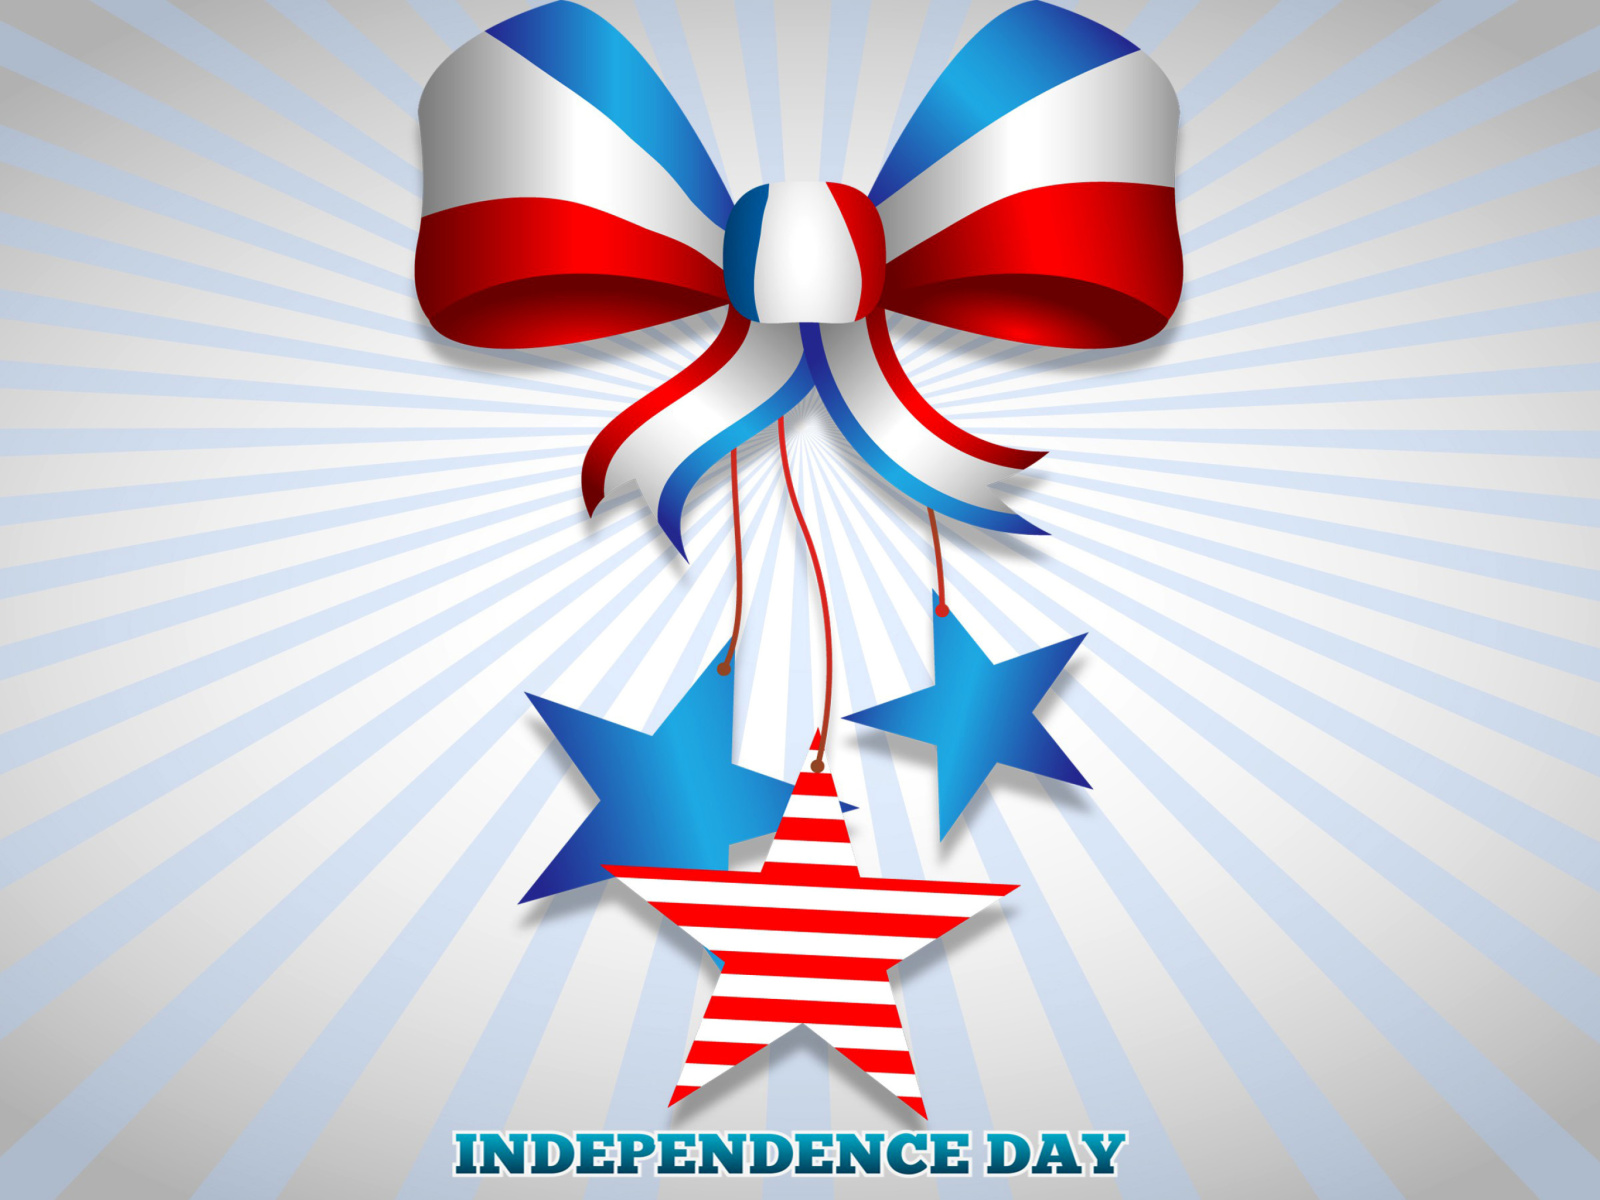 Das United states america Idependence day 4th july Wallpaper 1600x1200